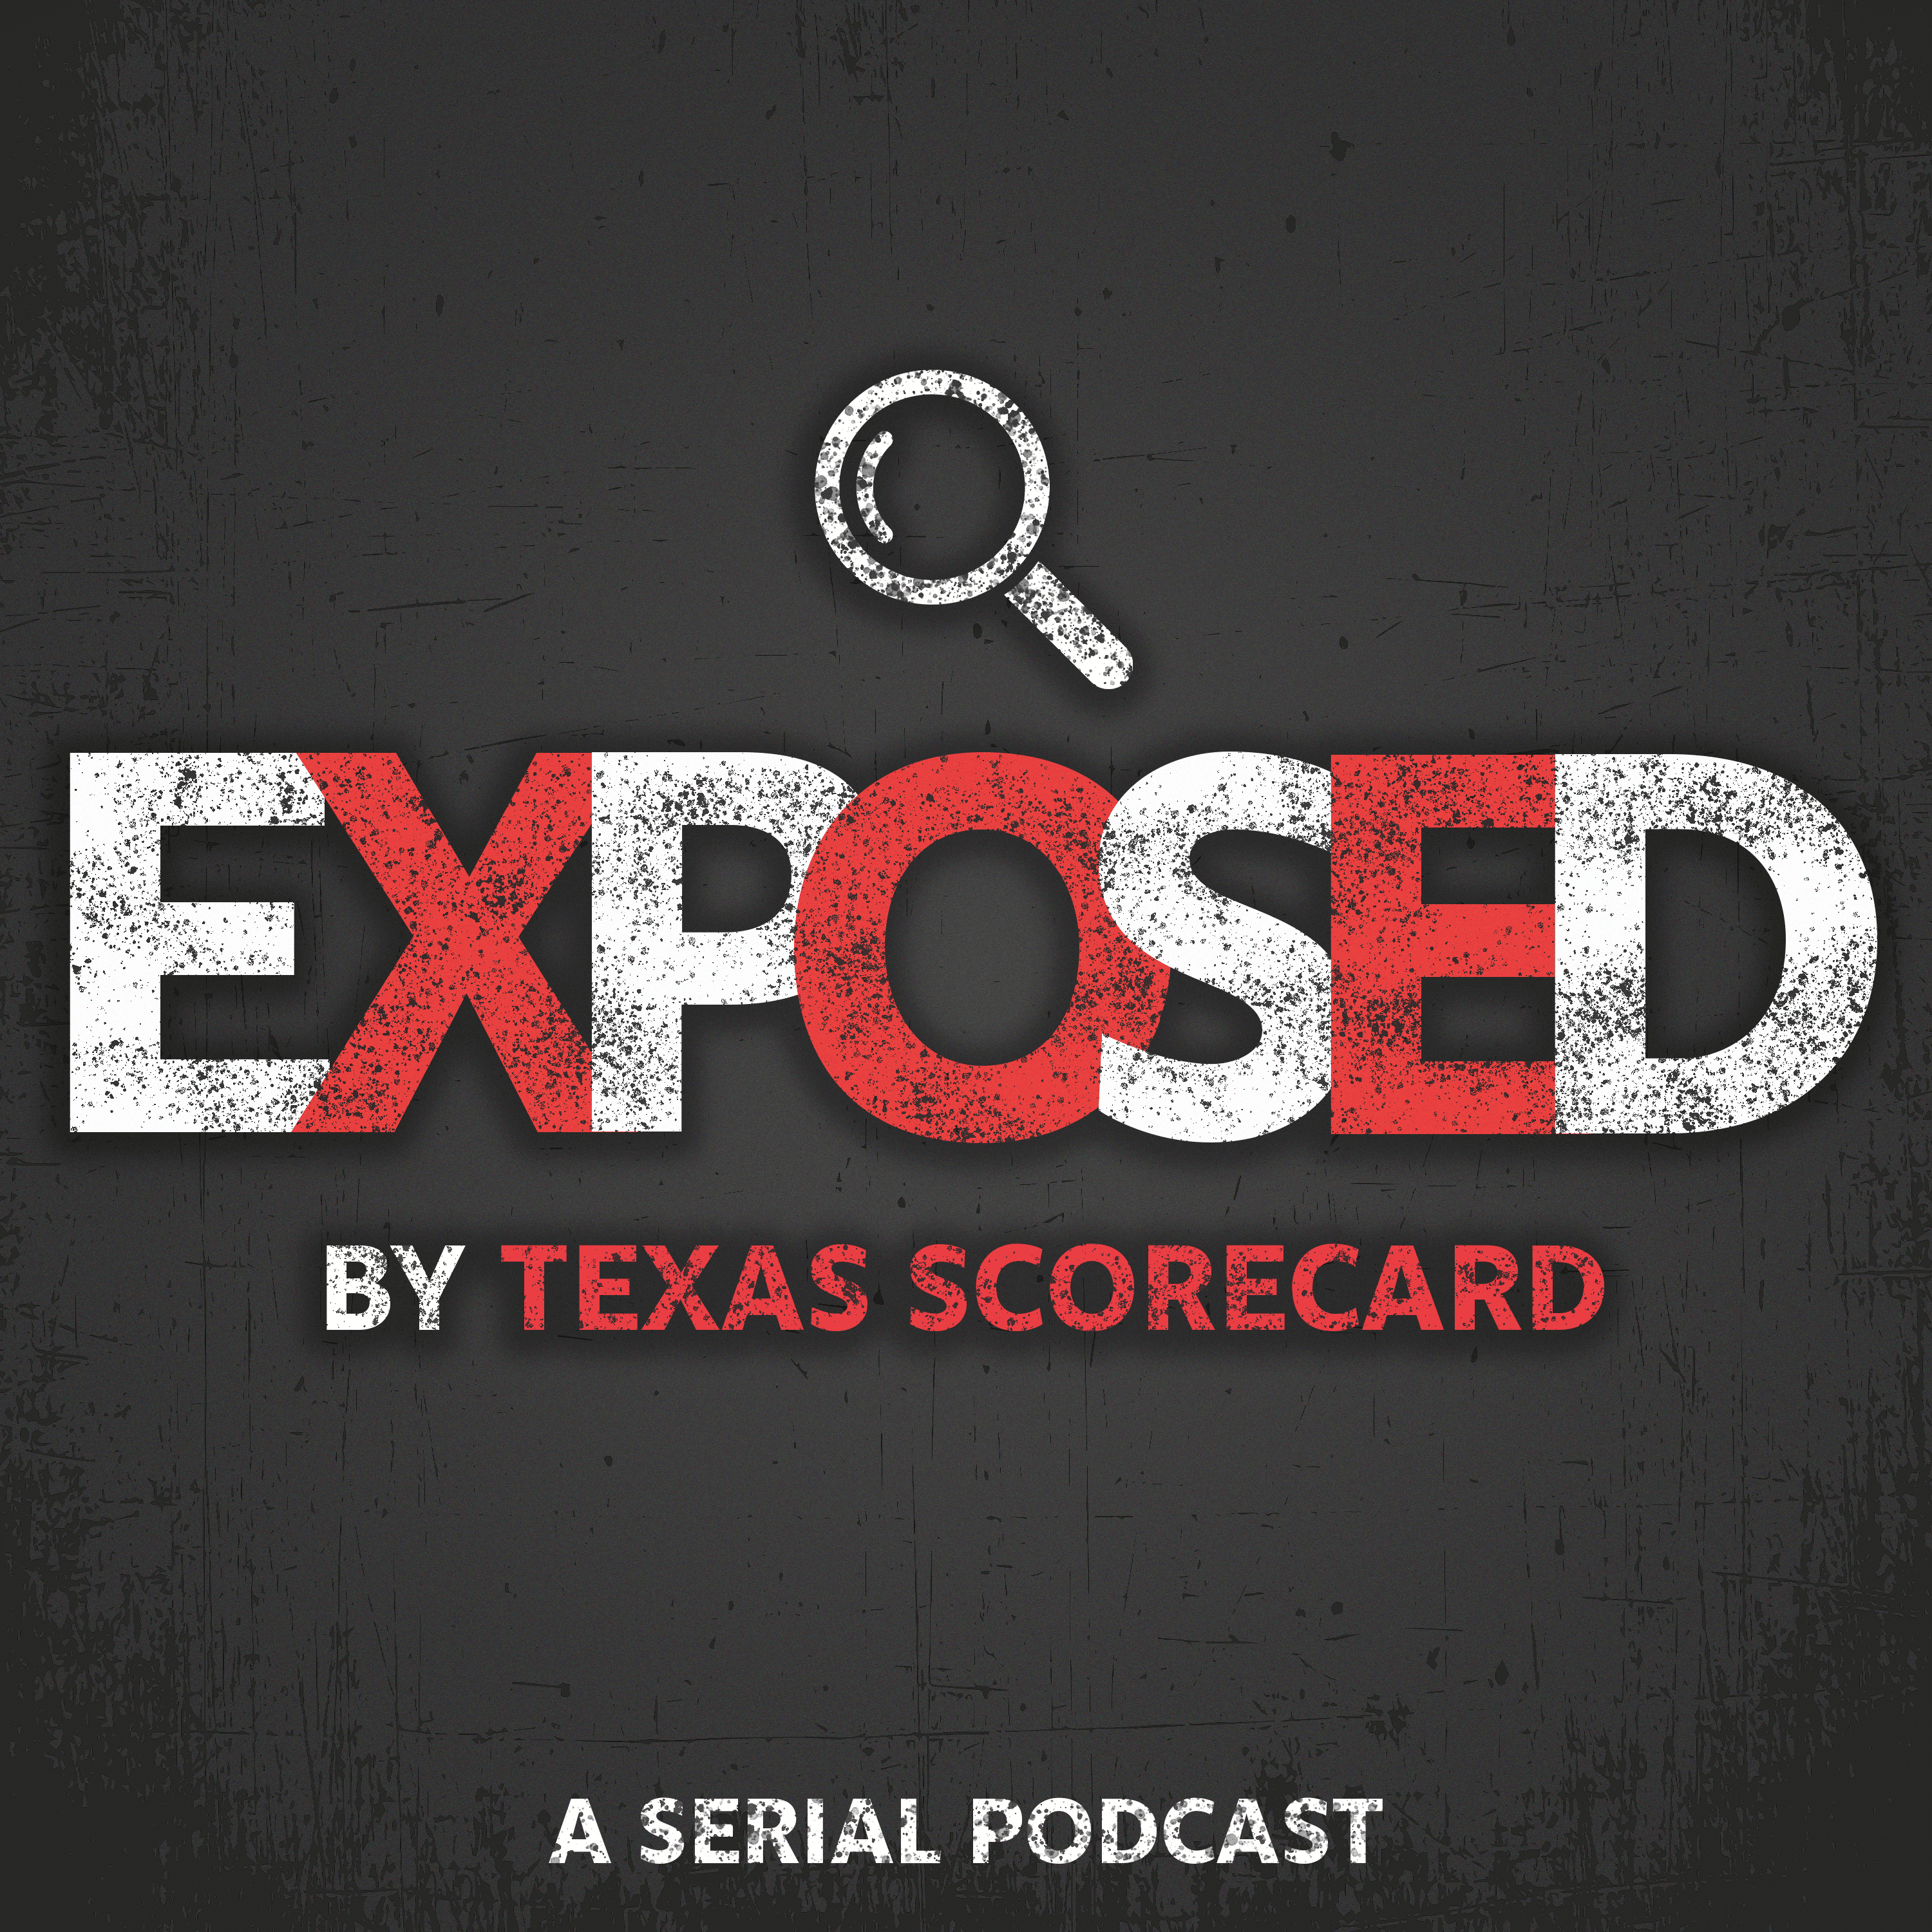 EXPOSED: A Serial Podcast